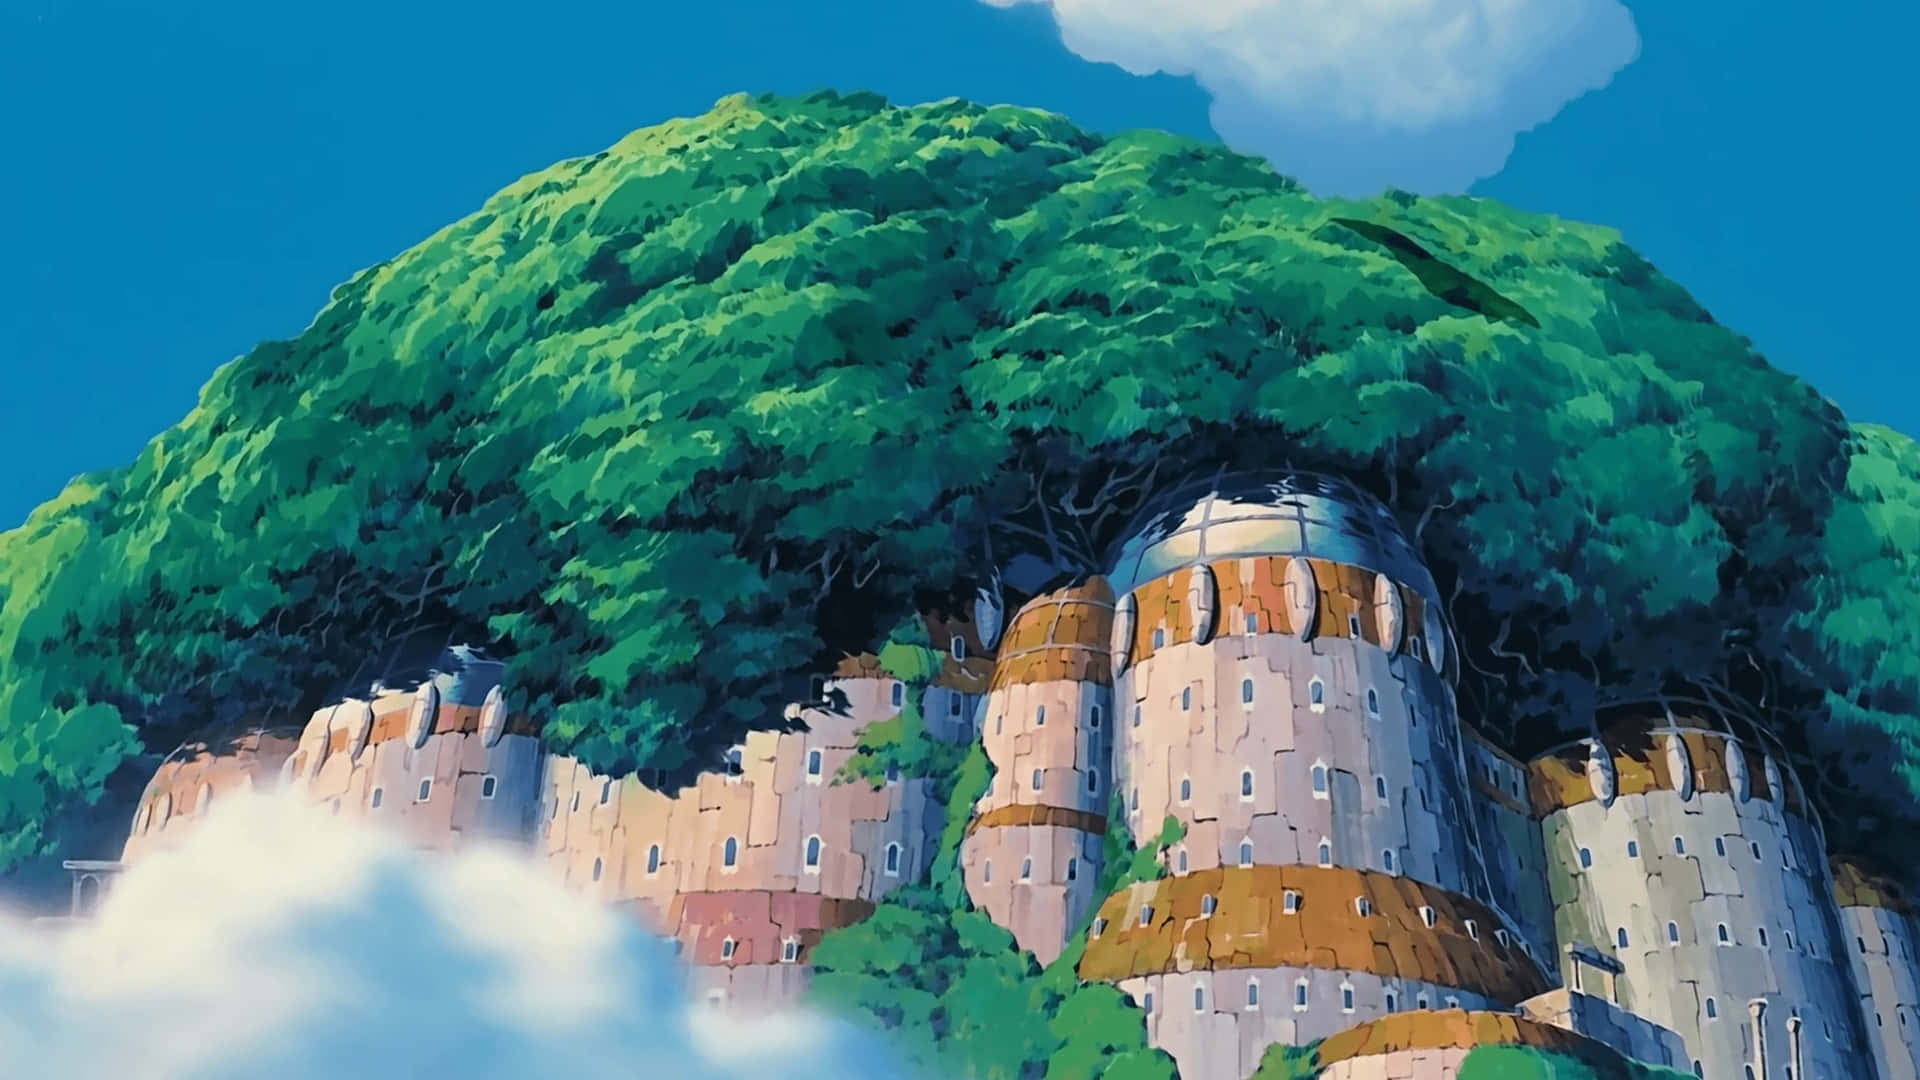 A magical journey with Hayao Miyazaki's legendary characters Wallpaper